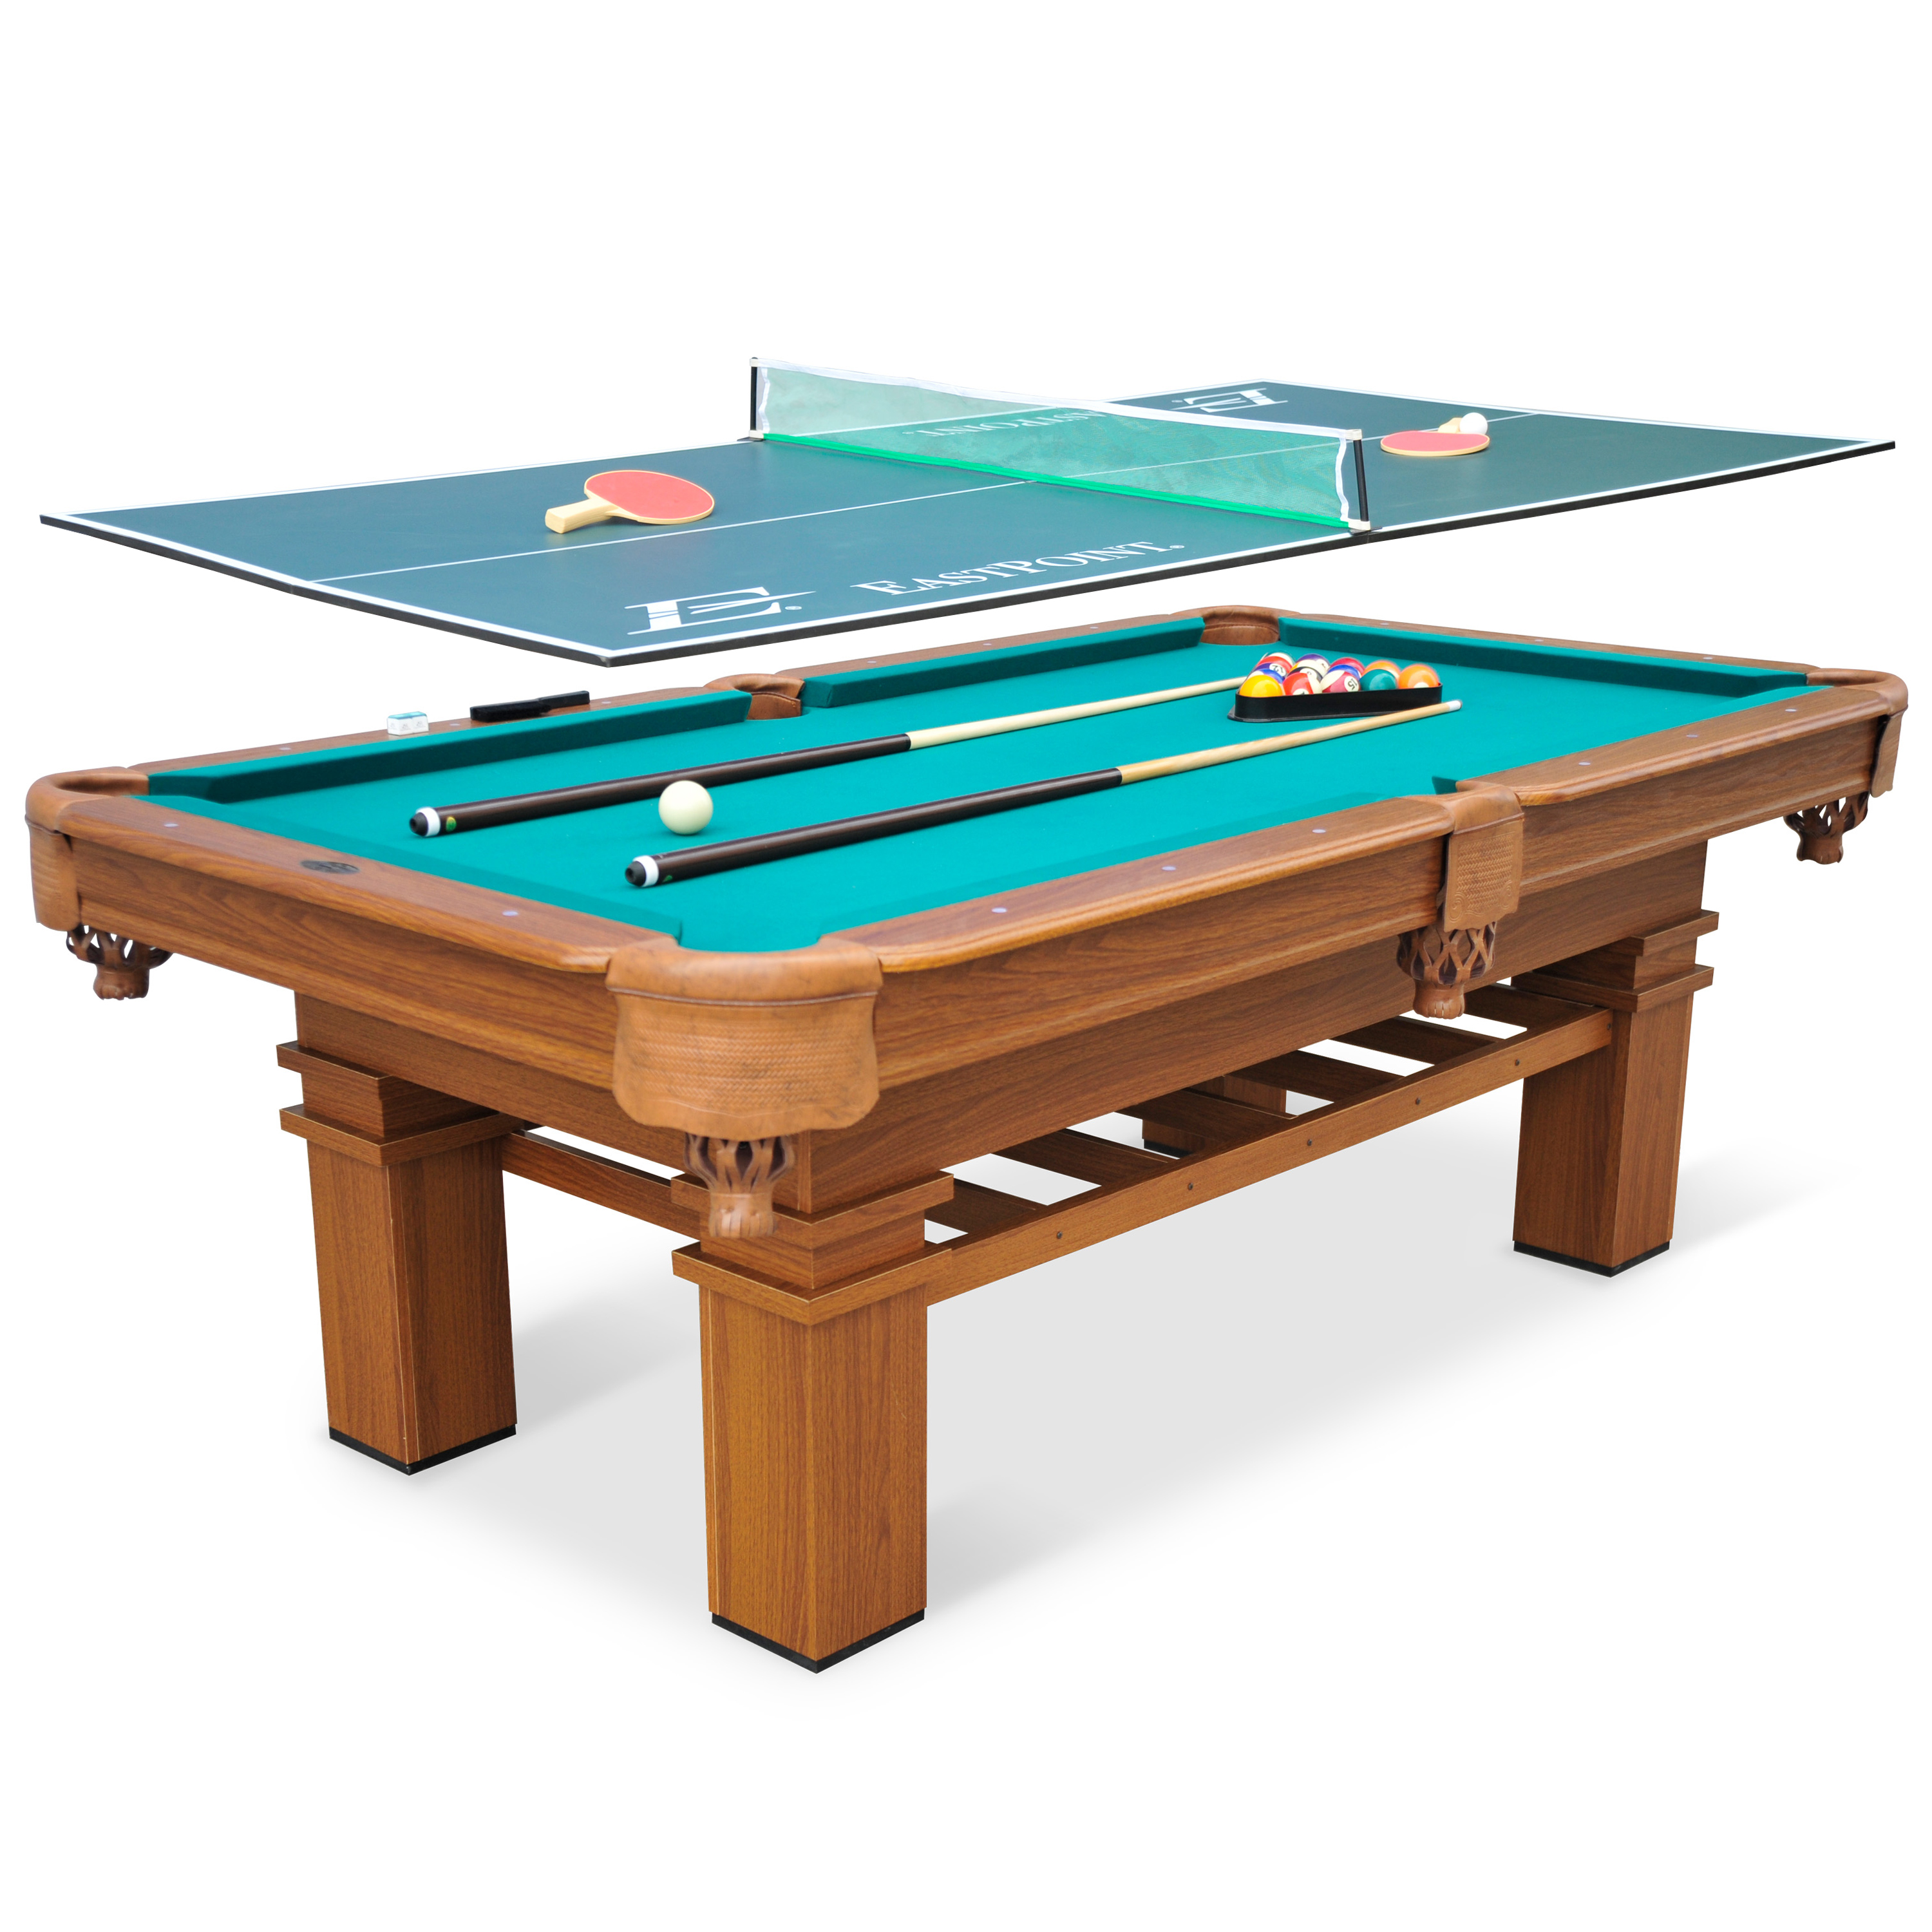 EastPoint Sports 87" Sinclair Billiard Table with 4-Piece Table Tennis Top - image 1 of 10